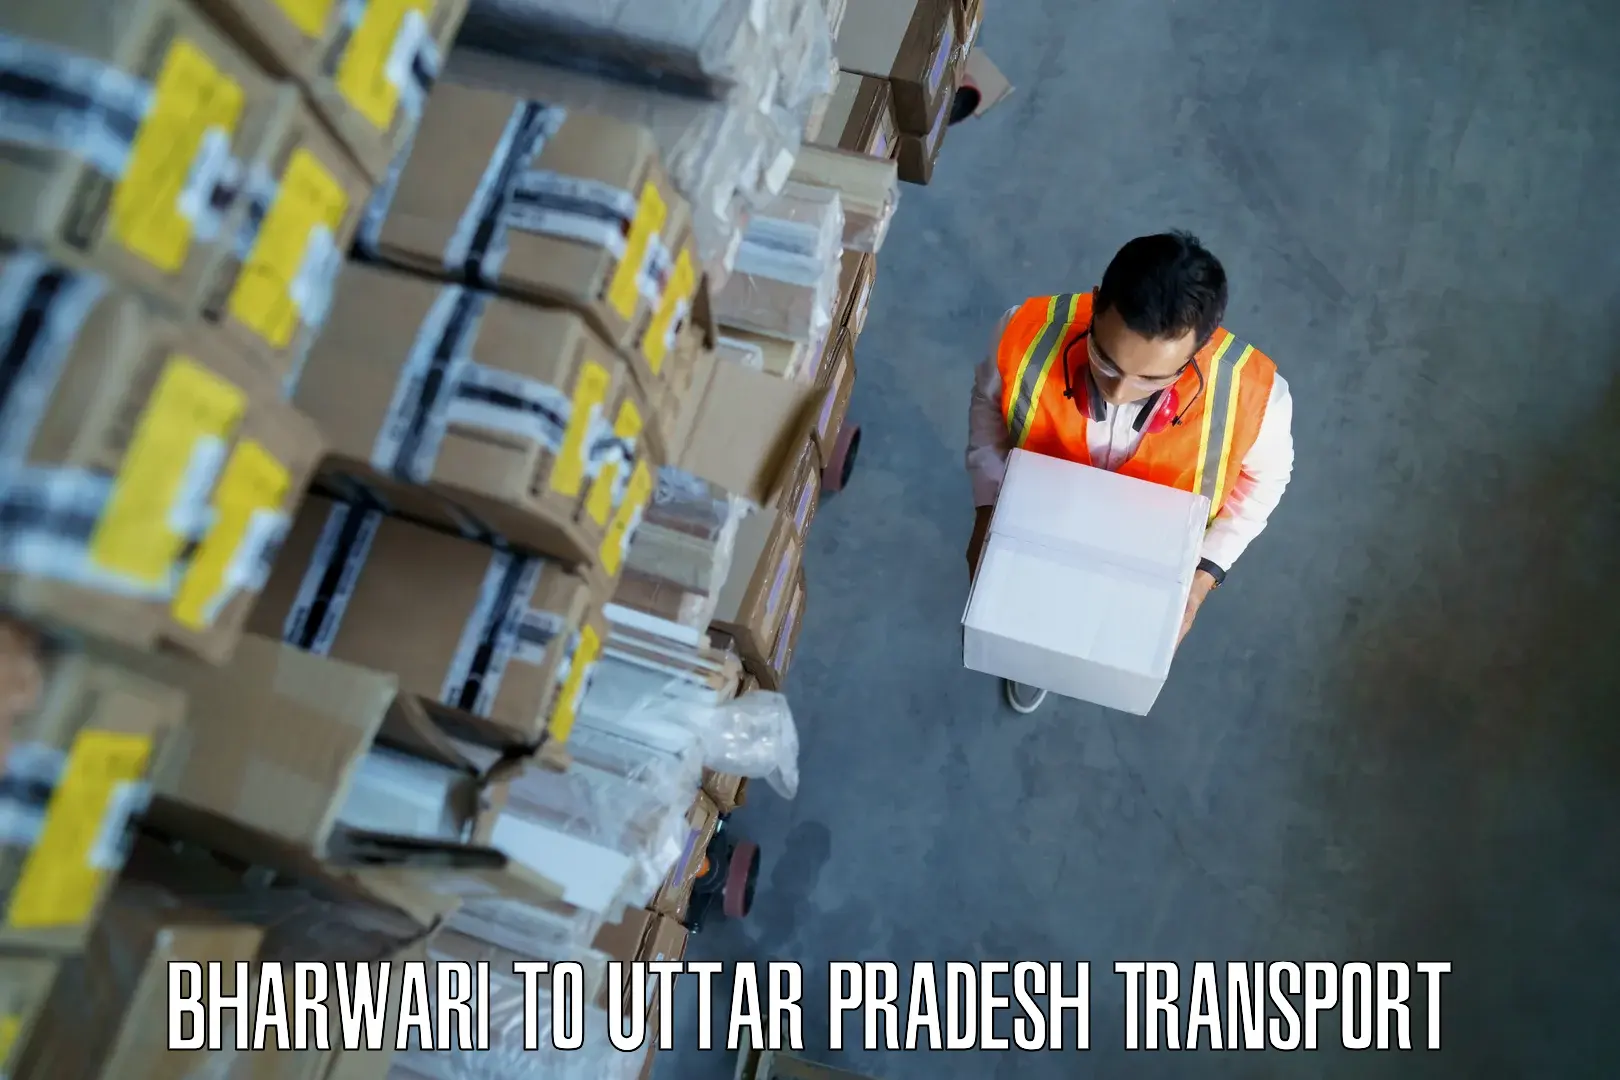 Daily parcel service transport Bharwari to Bhathat